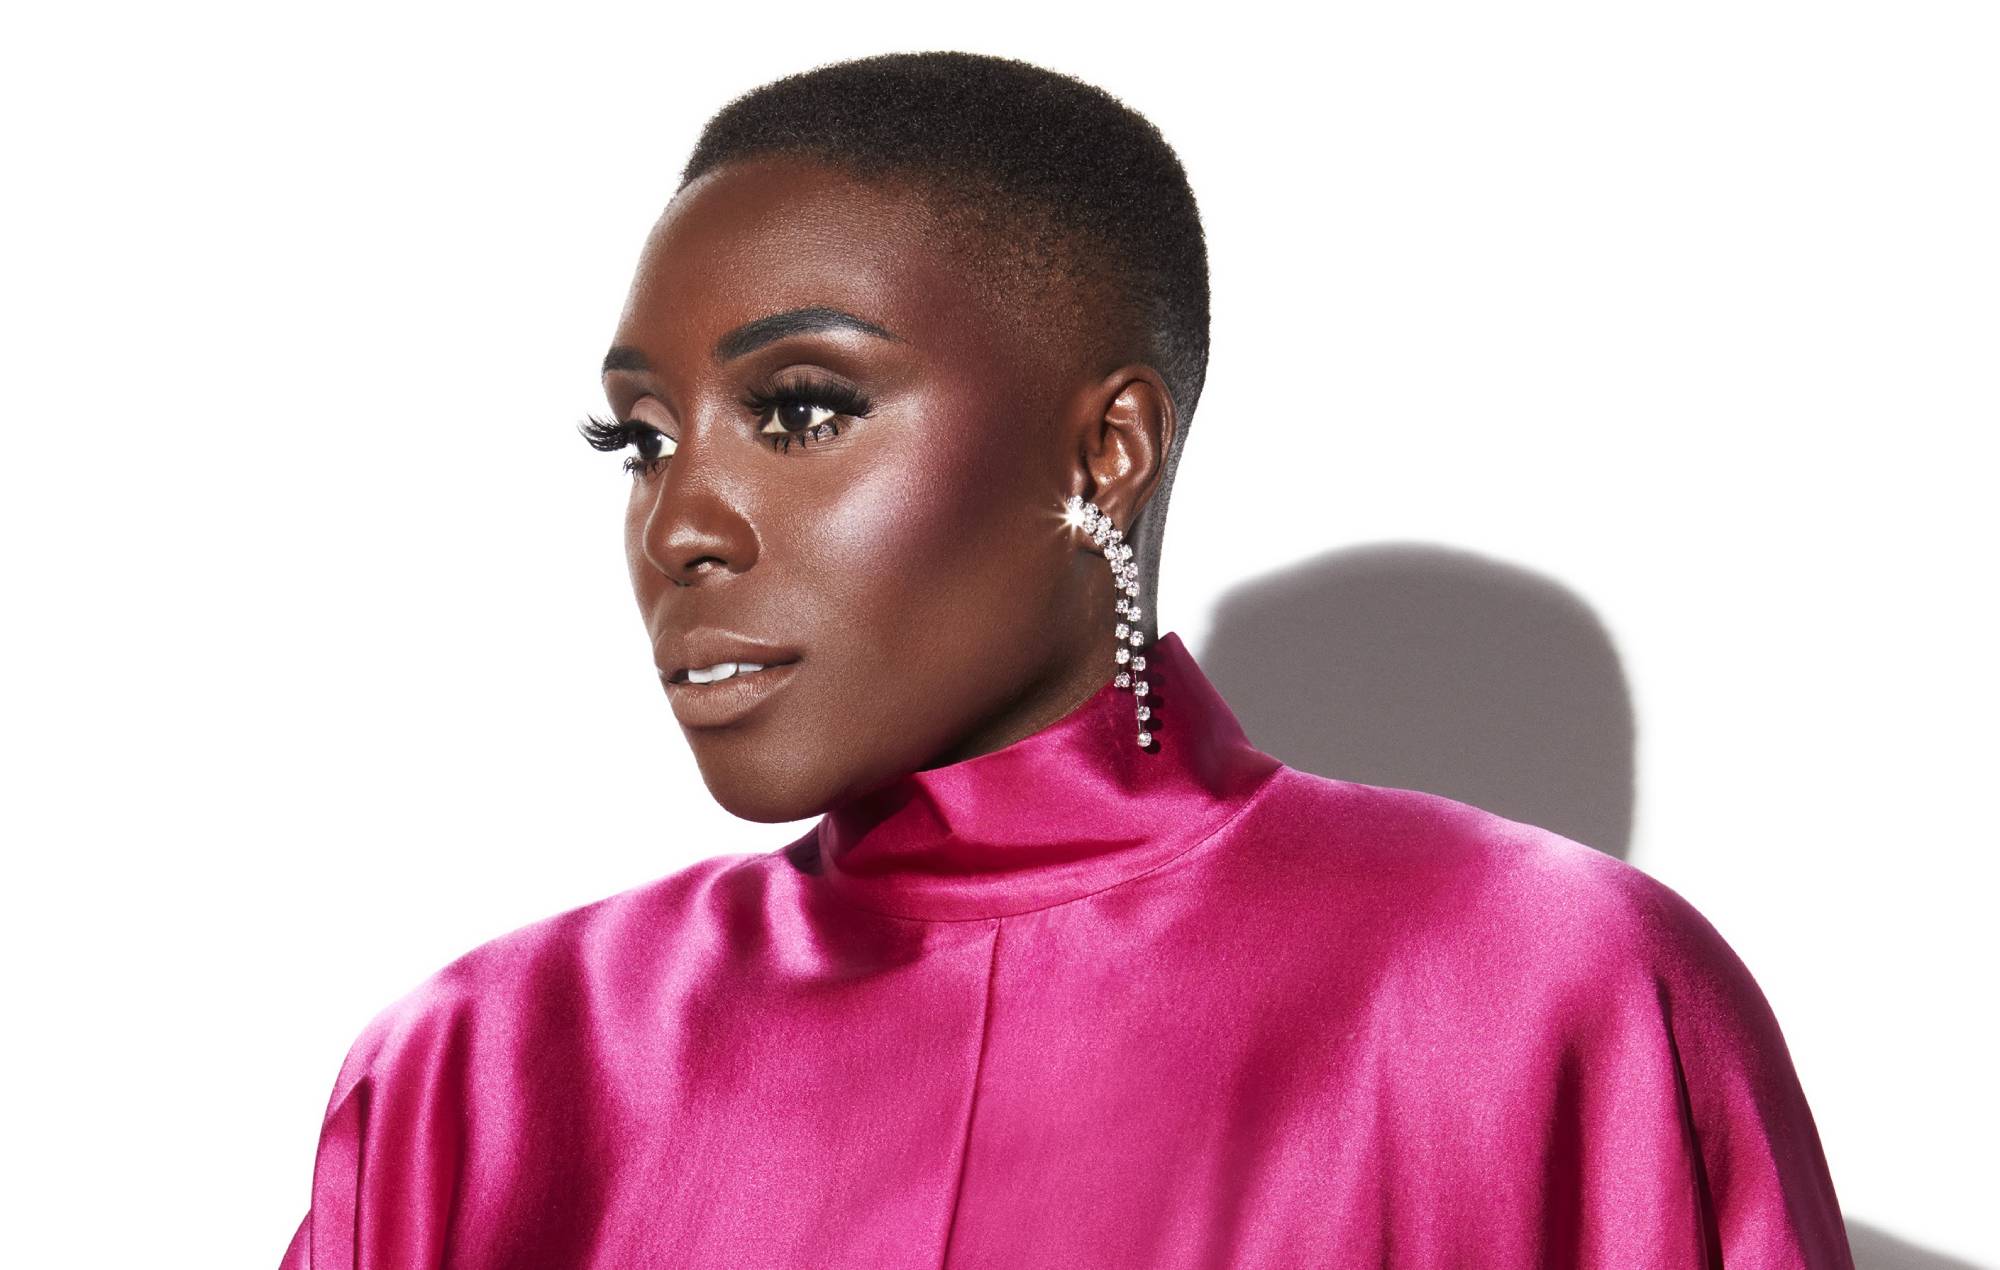 Laura Mvula: “I’ve heard that I’m ‘frowned upon’ within the music industry”